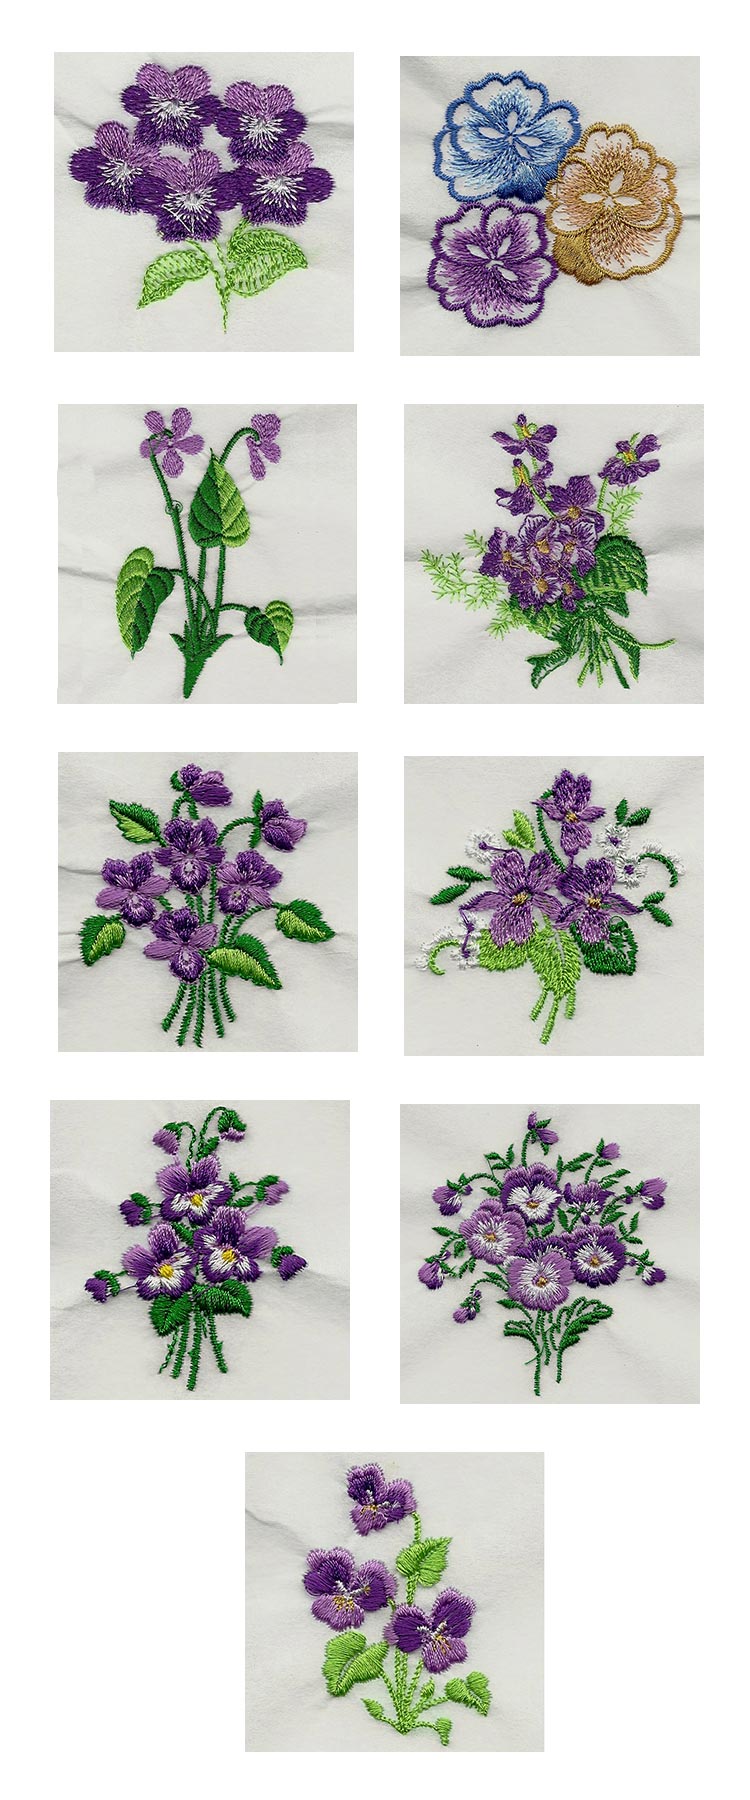 Pansies and Violets 2 Embroidery Machine Design Details